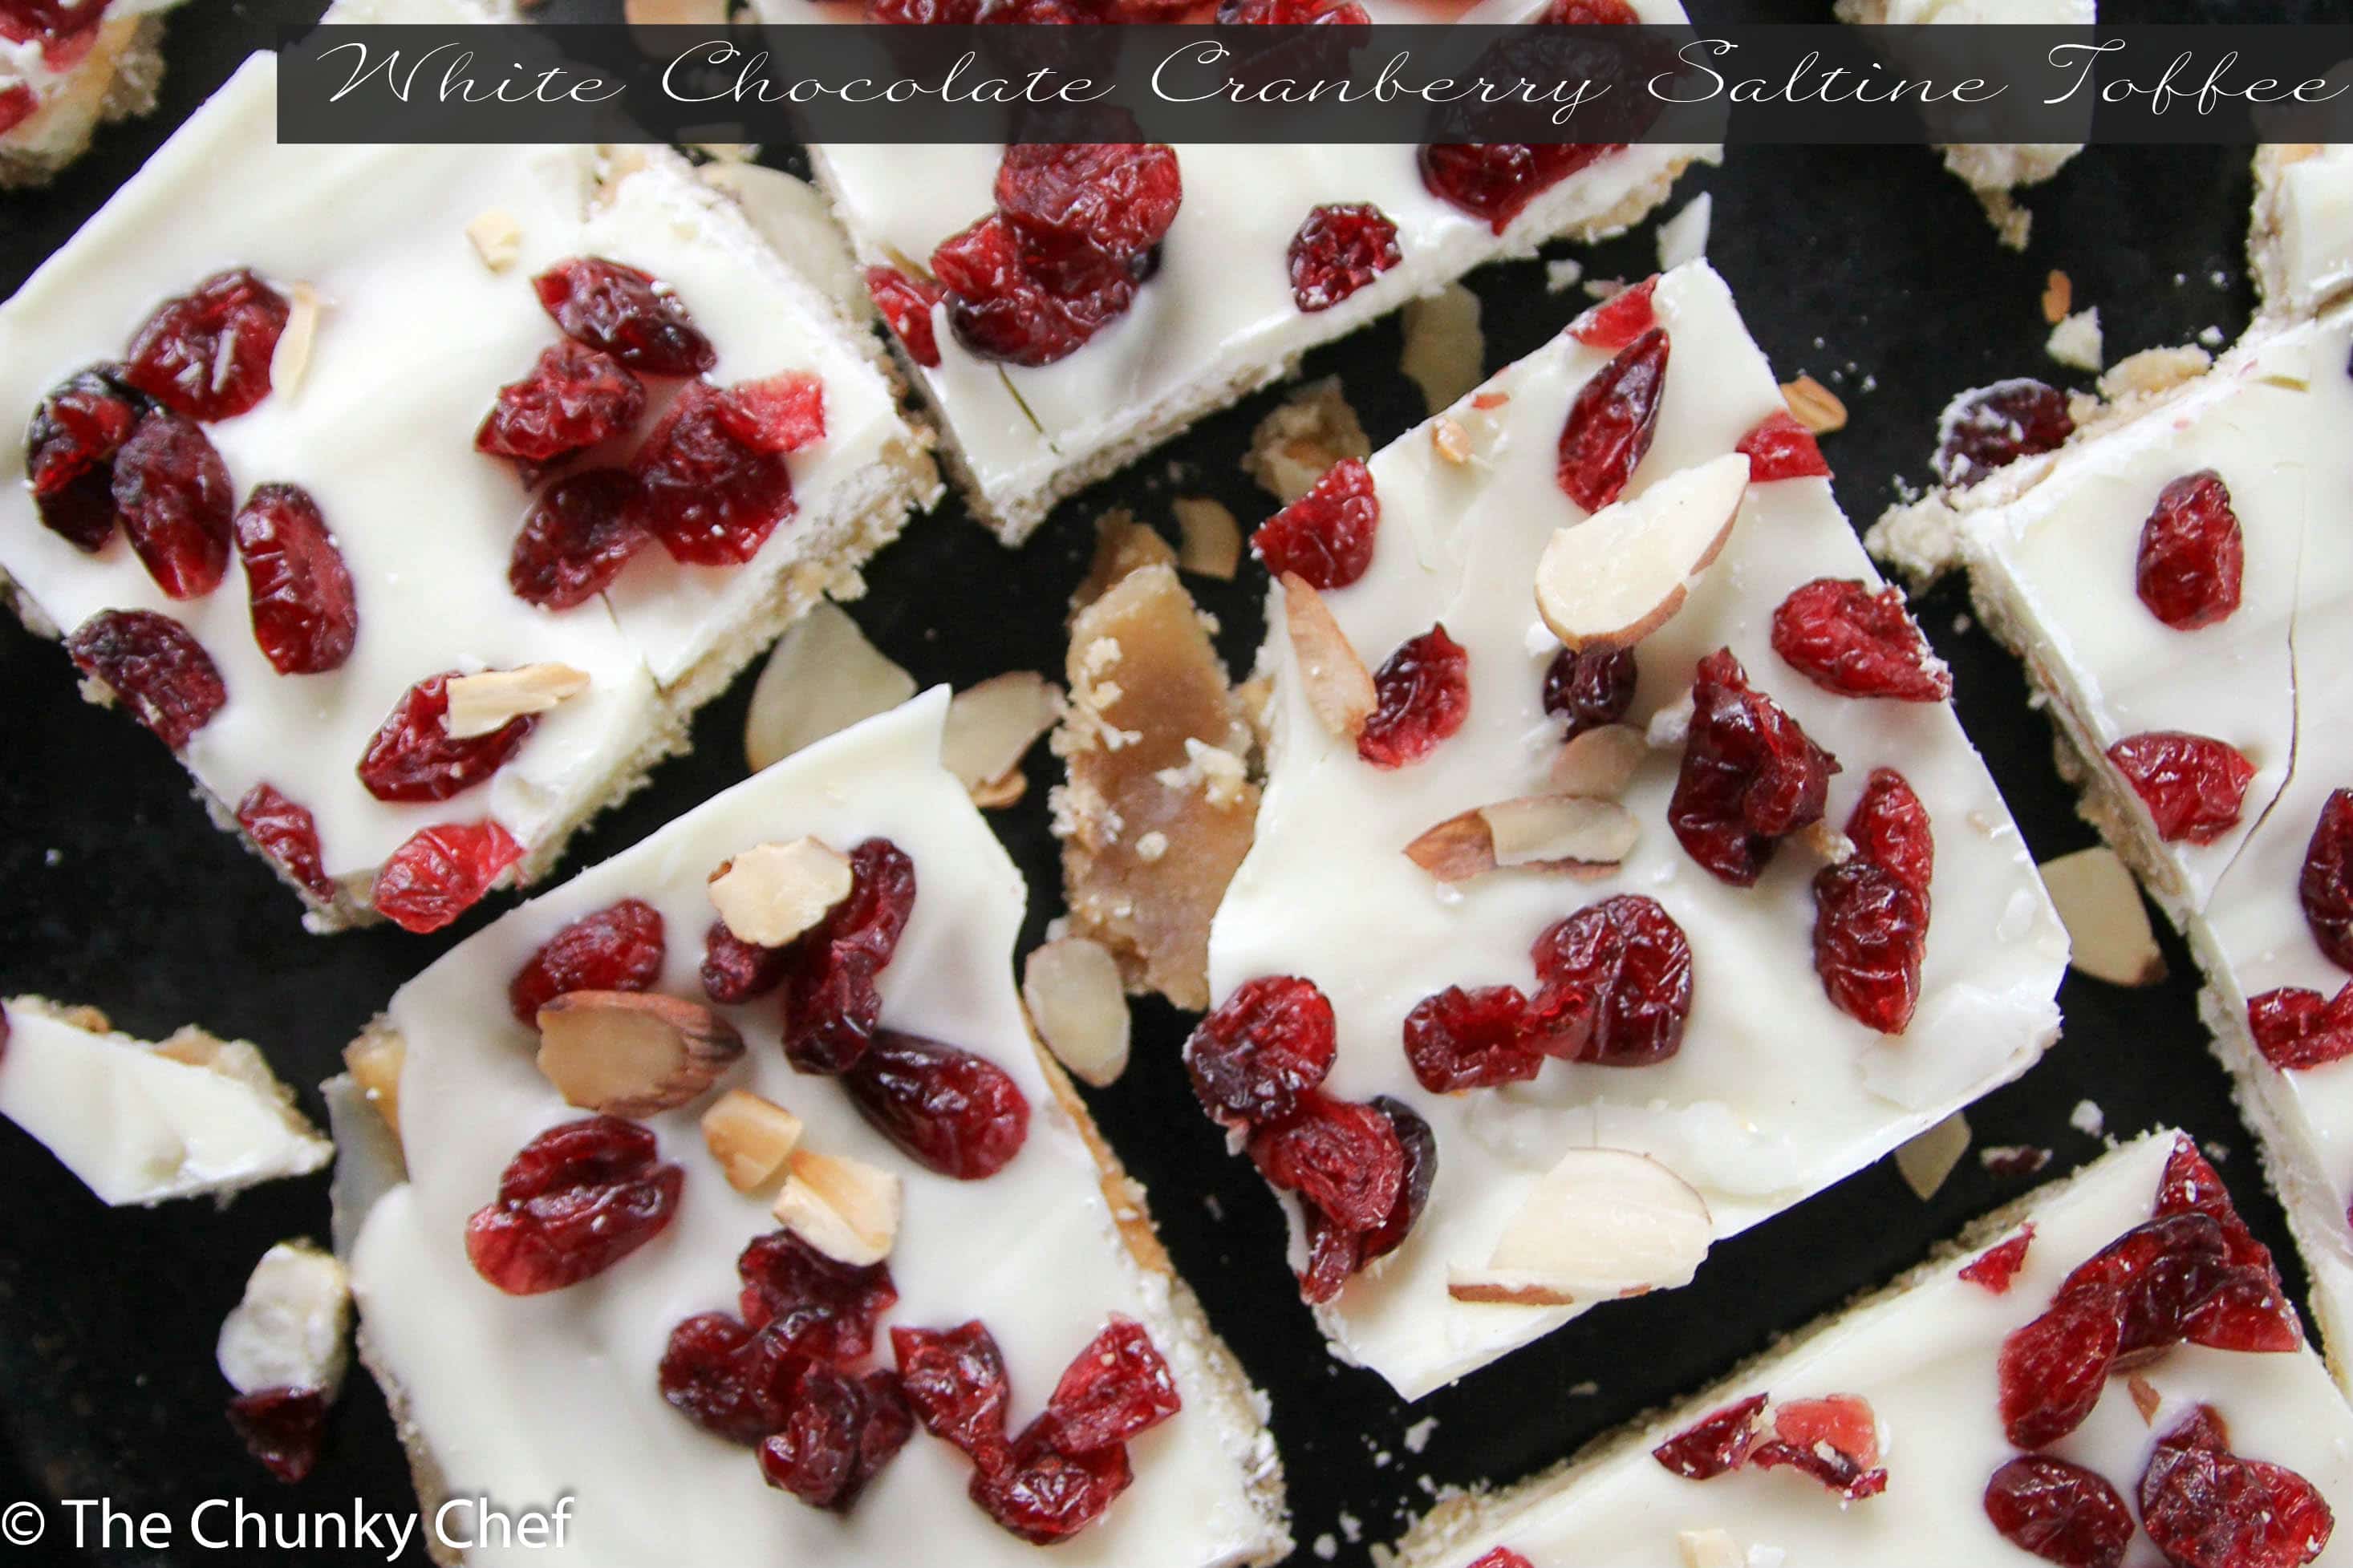 Saltine crackers are transformed into decadent white chocolate covered toffee studded with sweet cranberries and crunchy toasted almonds